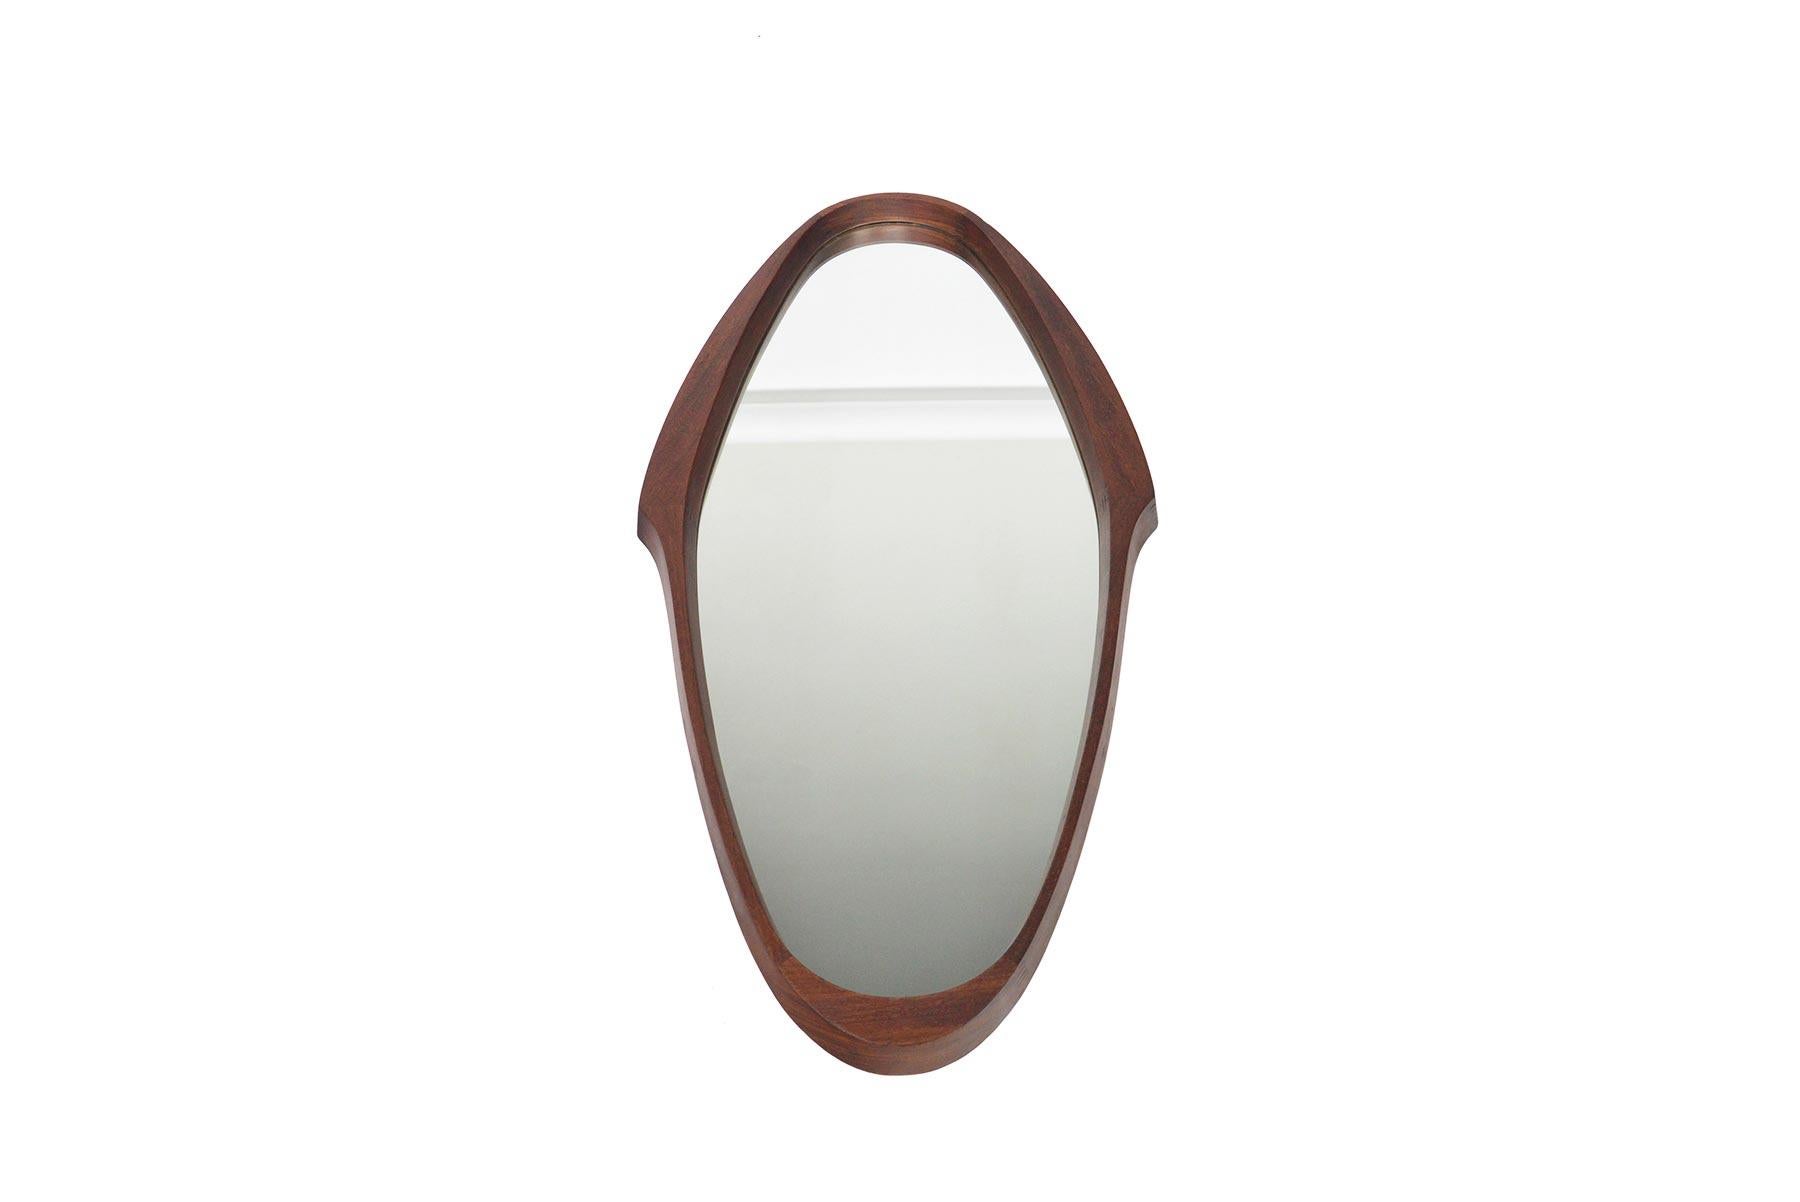 This stunning Italian Mid-Century Modern wall mirror is crafted from solid walnut to create an elegant oval shape. In excellent original condition with typical wear for its vintage.

  